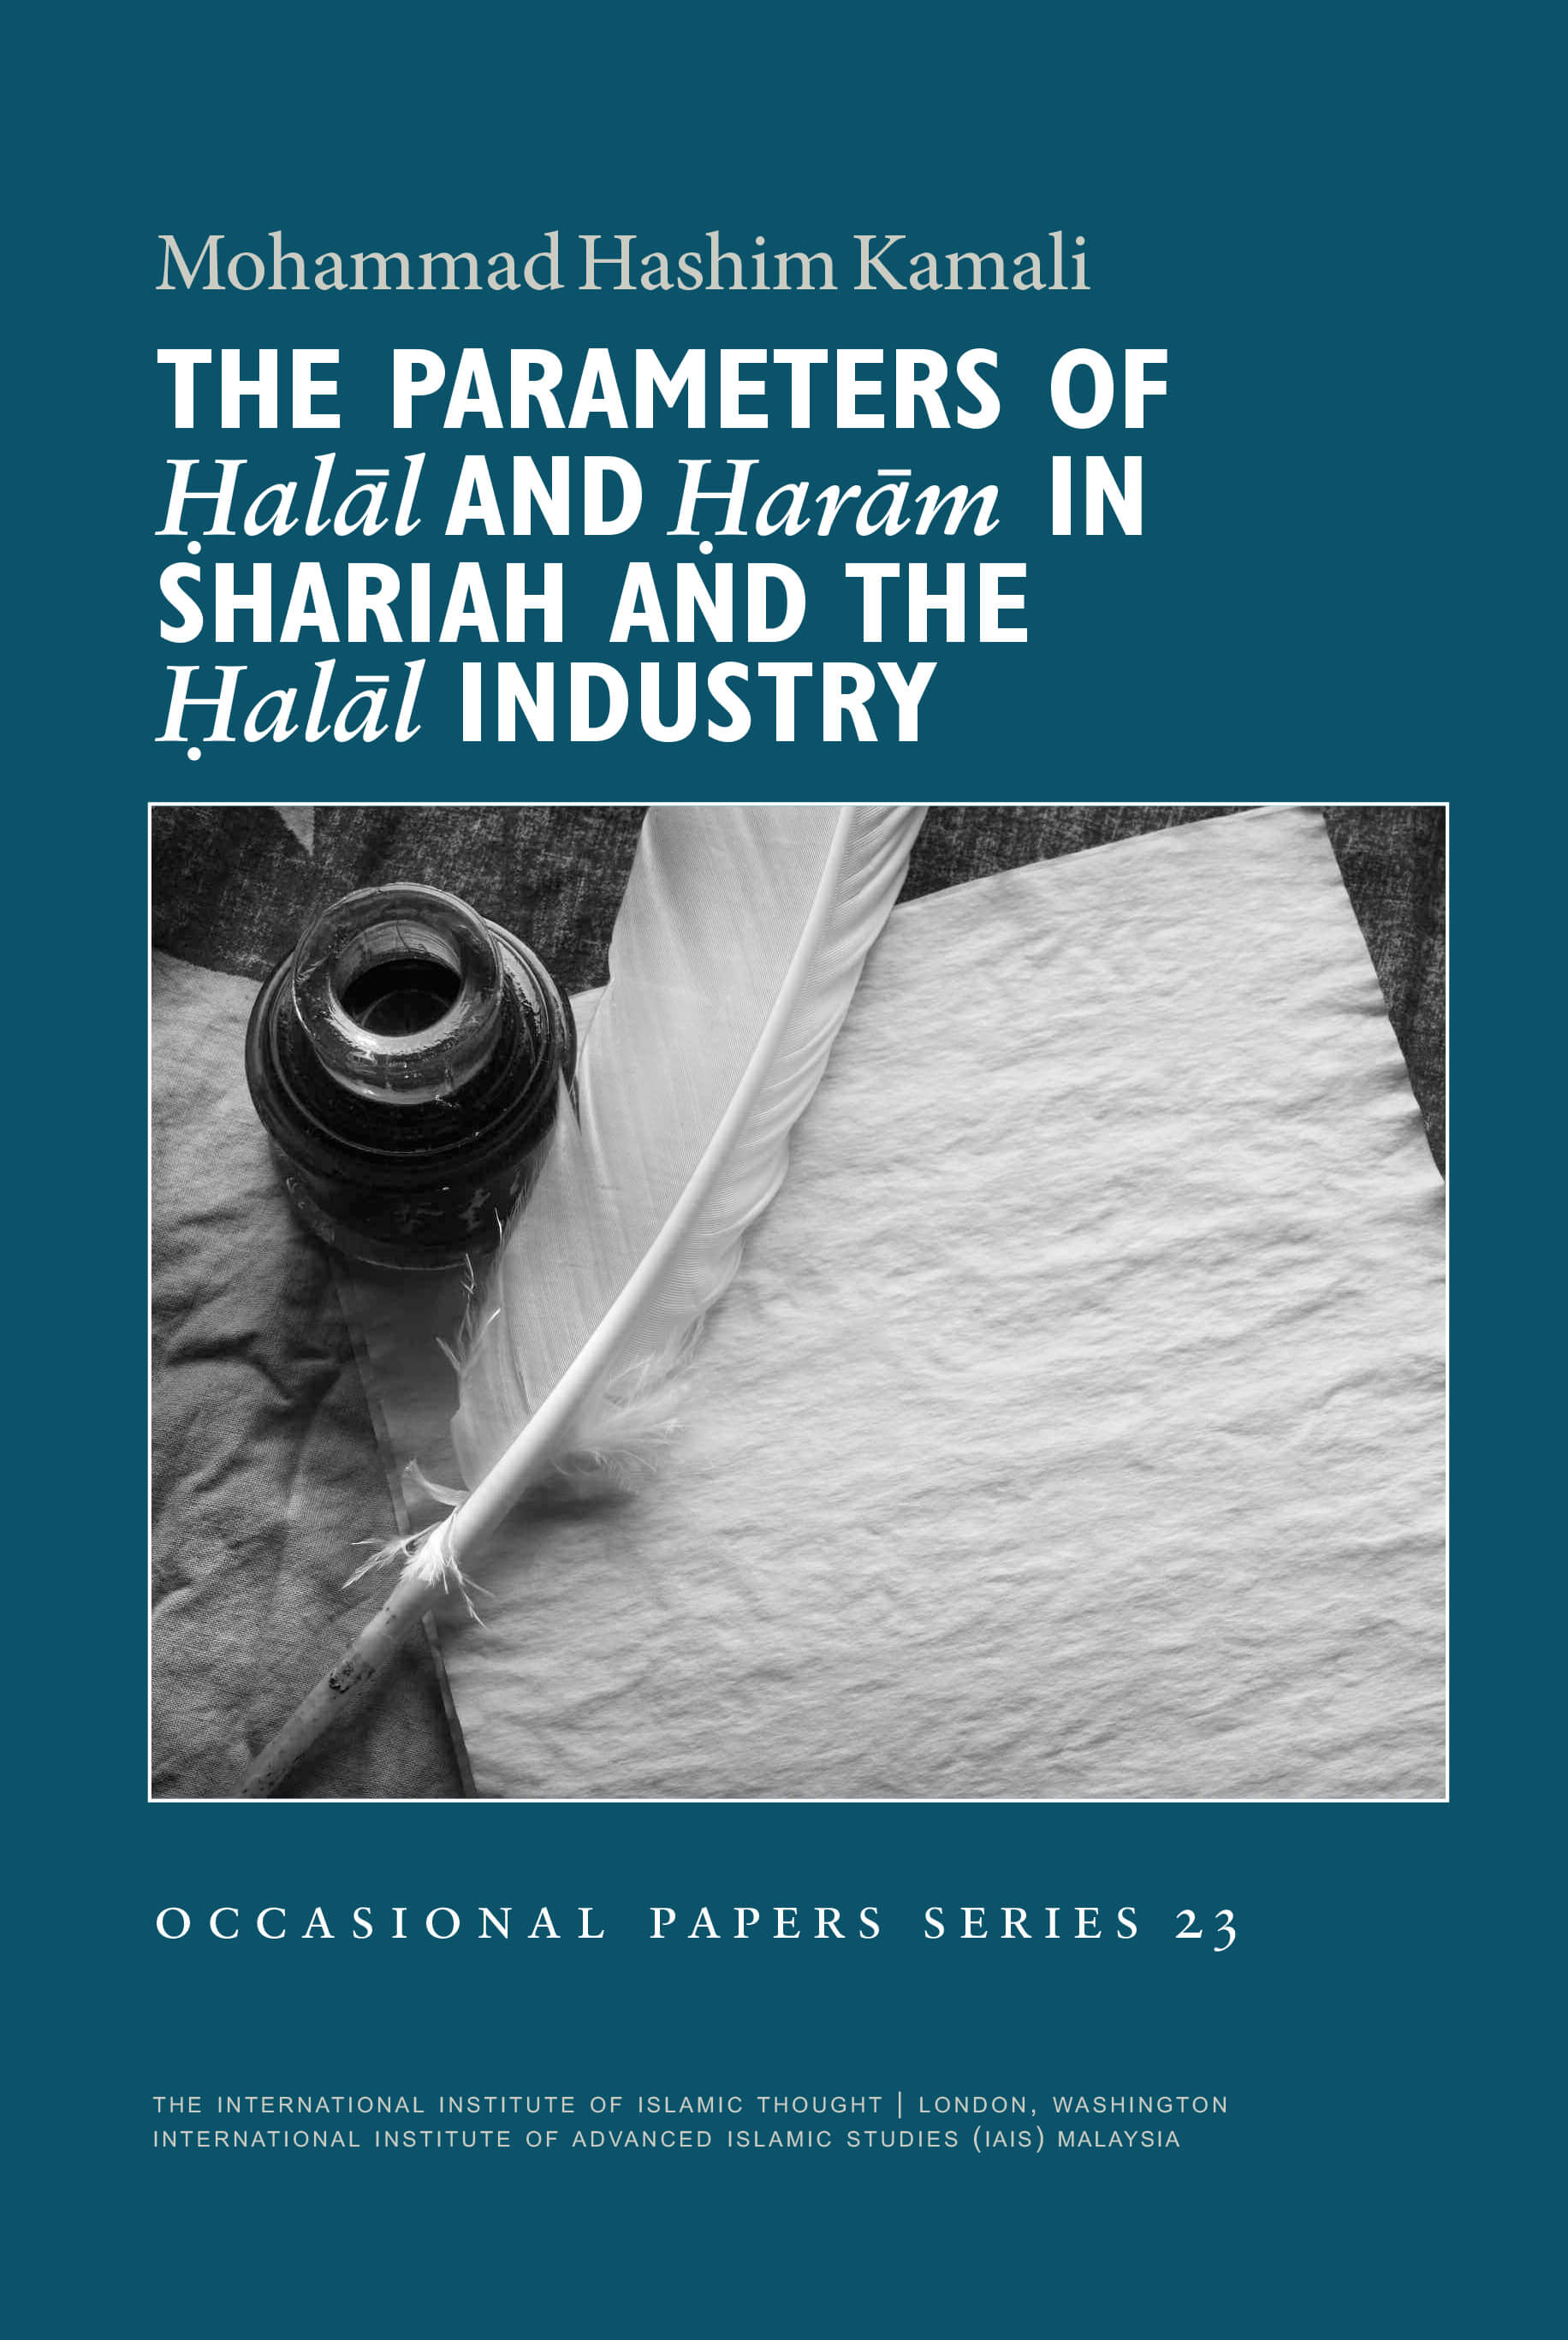 The Parameters of Halal and Haram in Shariah and the Halal Industry (Occasional Papers Series 23)